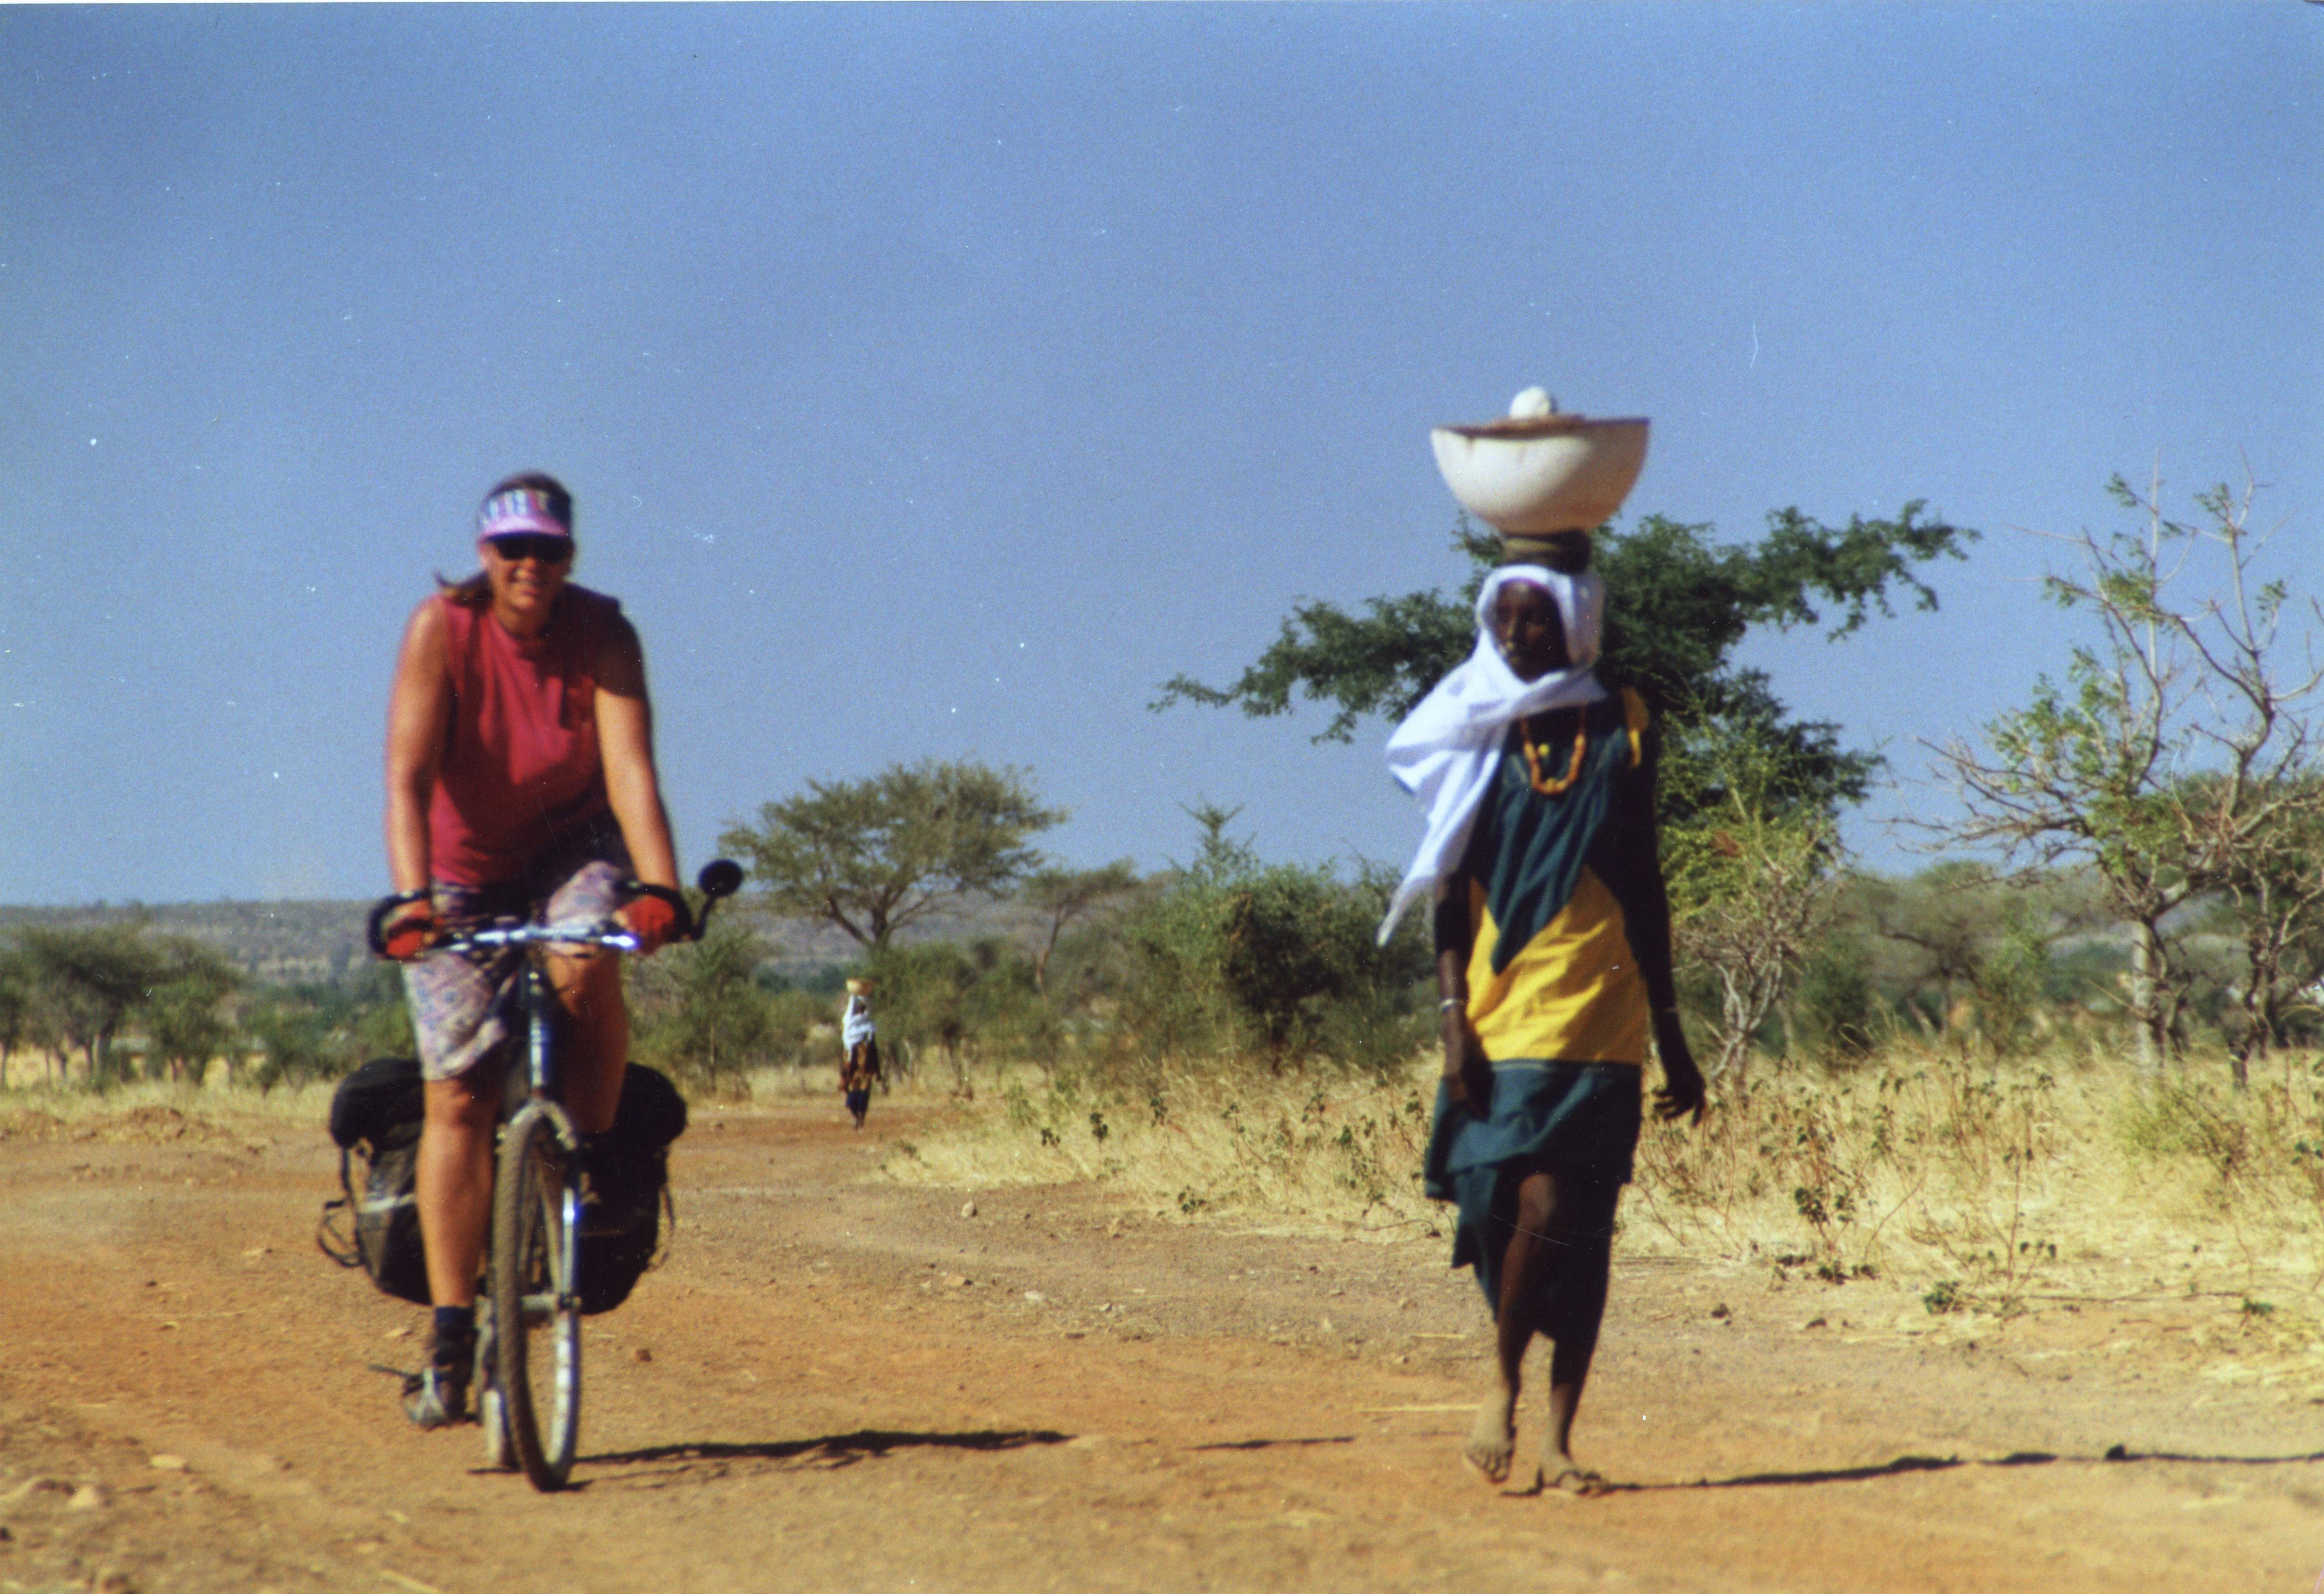 Nancy Explains: "Me cycling in Mali. We had the brilliant idea of taking off across a dirt road the map showed cutting through the desert. As we progressed farther, the road condition deteriorated and eventually the road turned into nothing more than a small trail. People assured us that Djenne was "that way" so we kept going - for about 80 miles along the little trail going through the desert. We were thrilled when we finally emerged from the desert!"